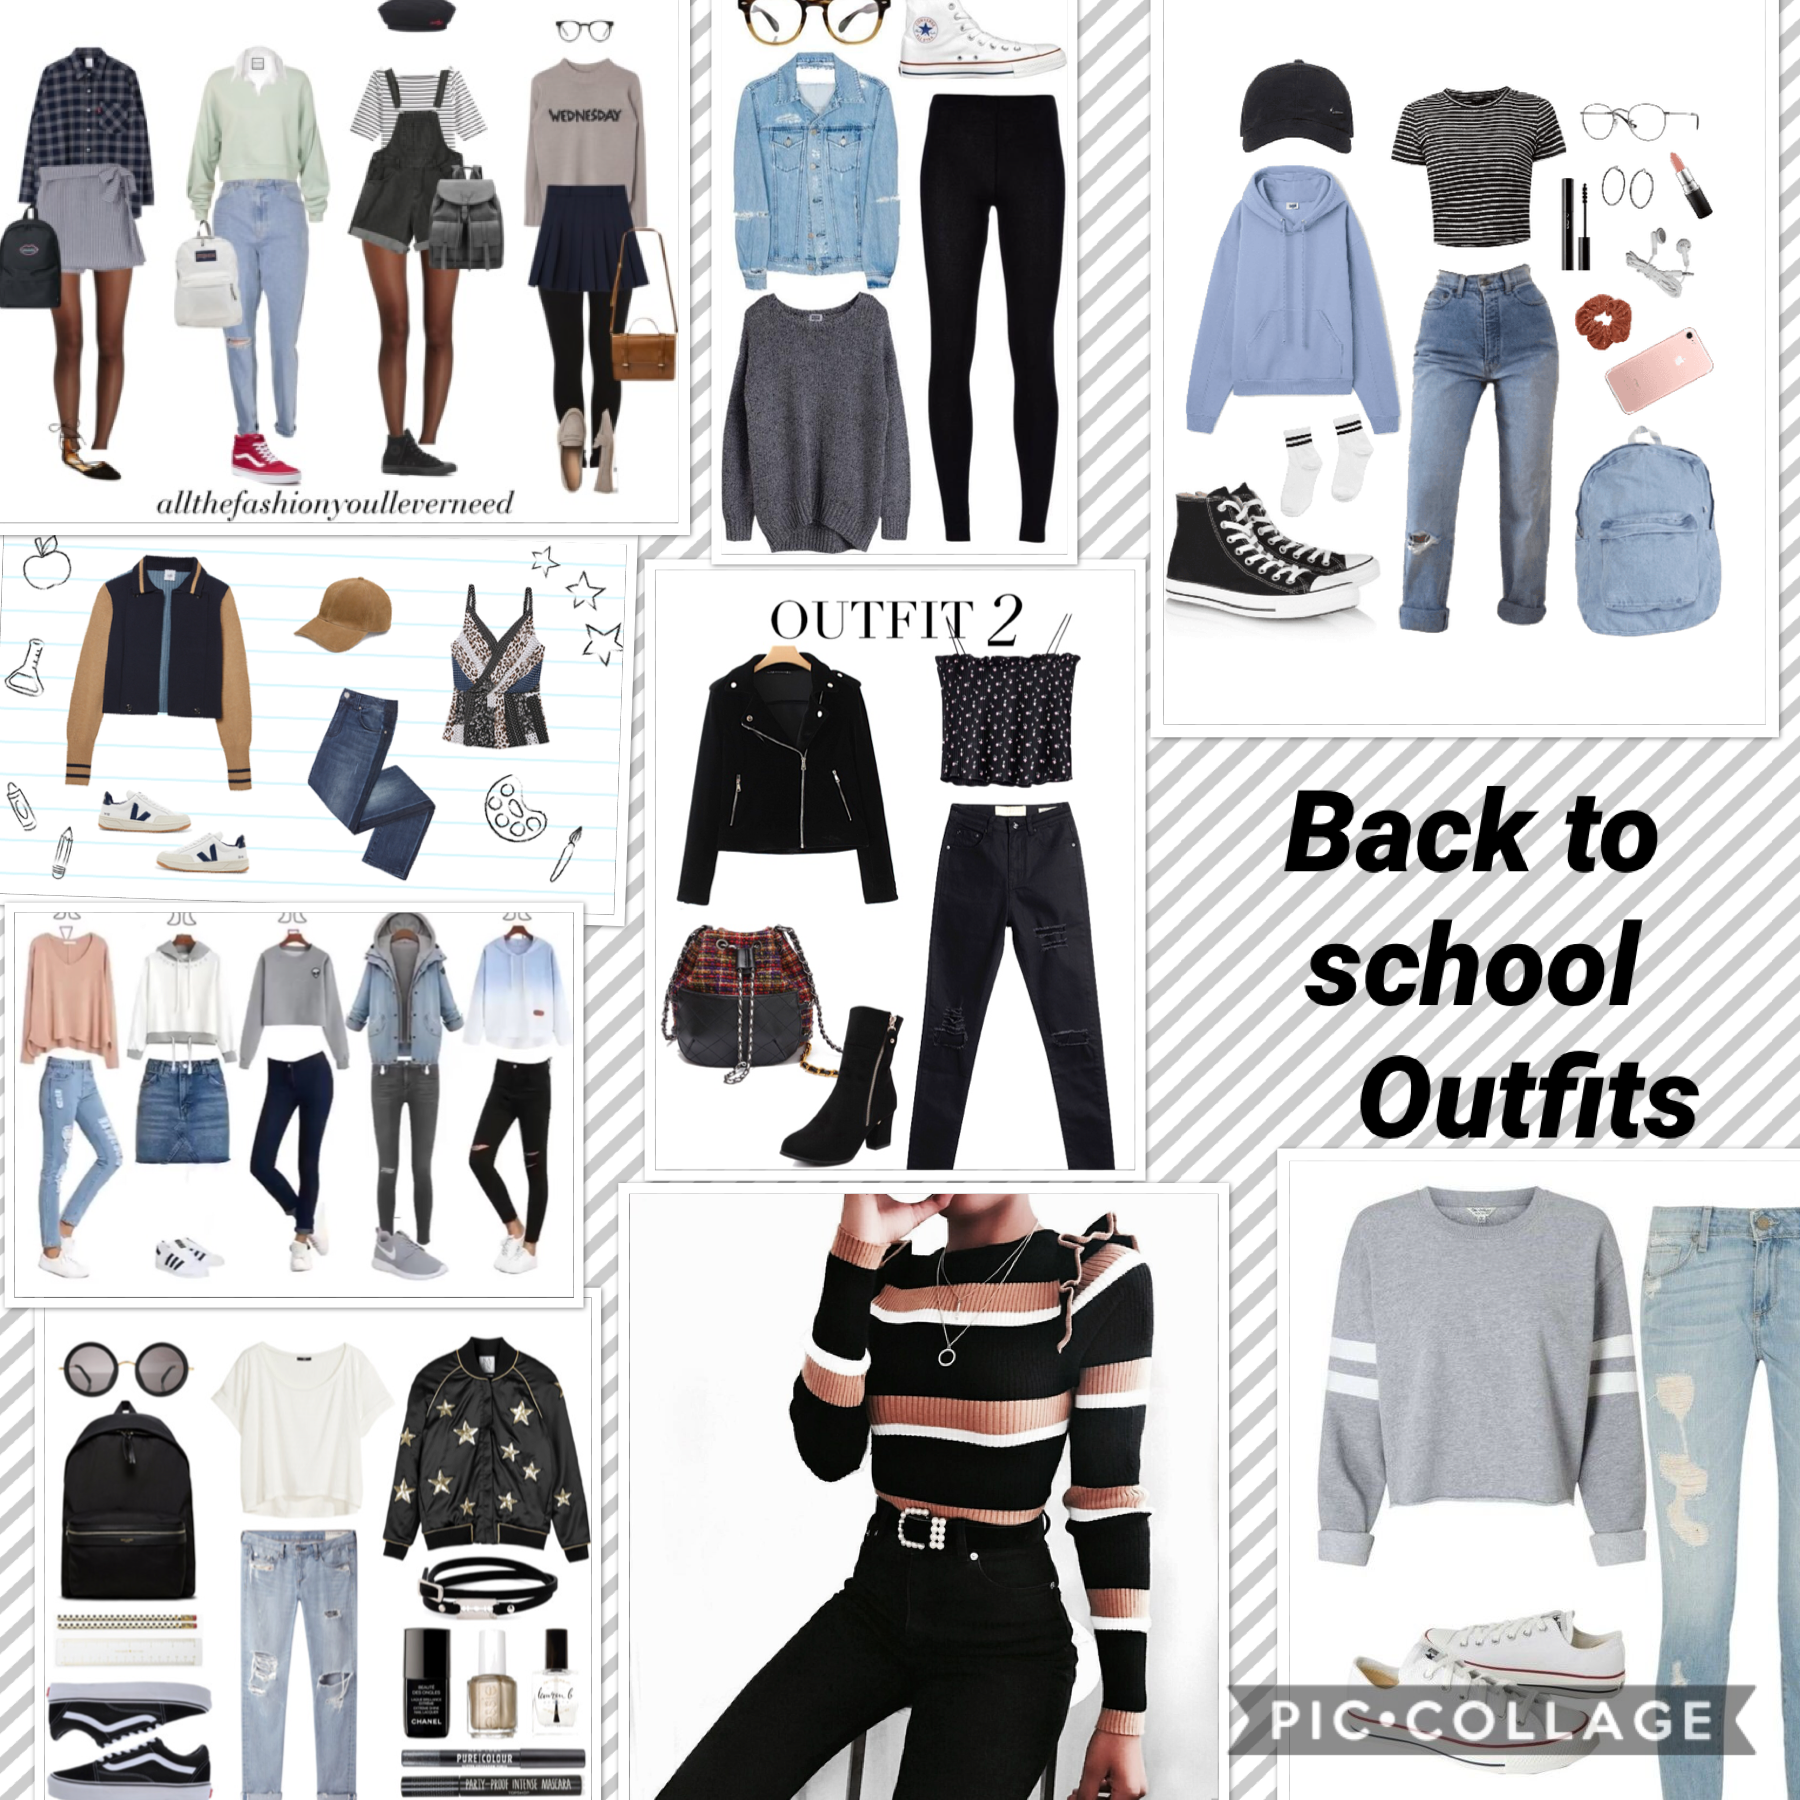 Sweet back to school outfits 